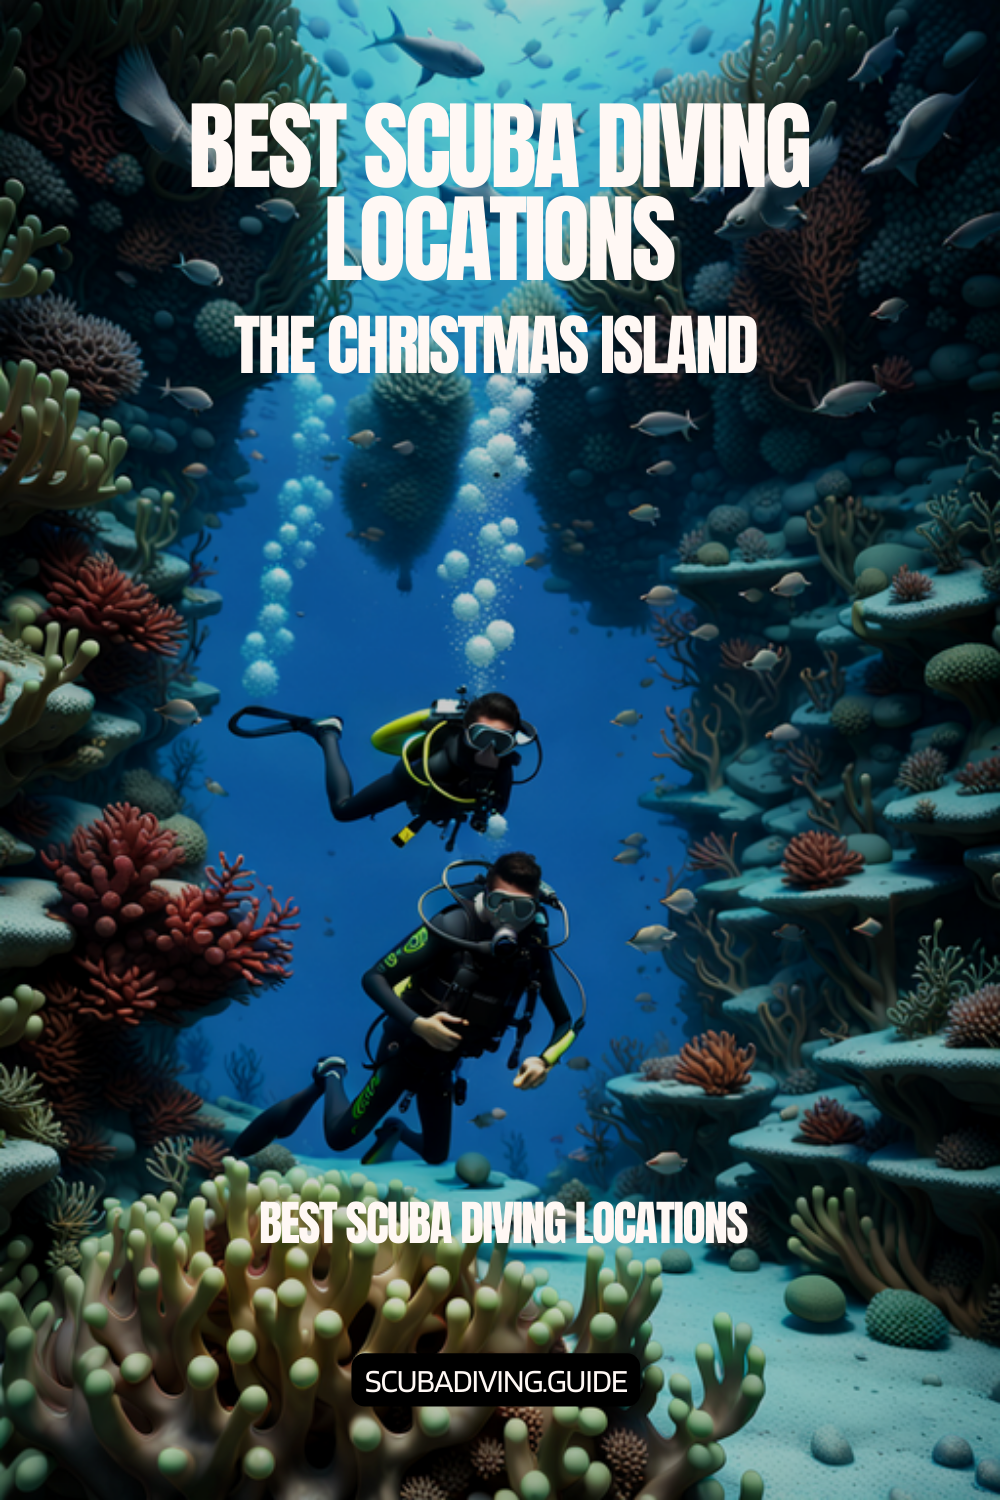 Scuba Diving Locations in The Christmas Island